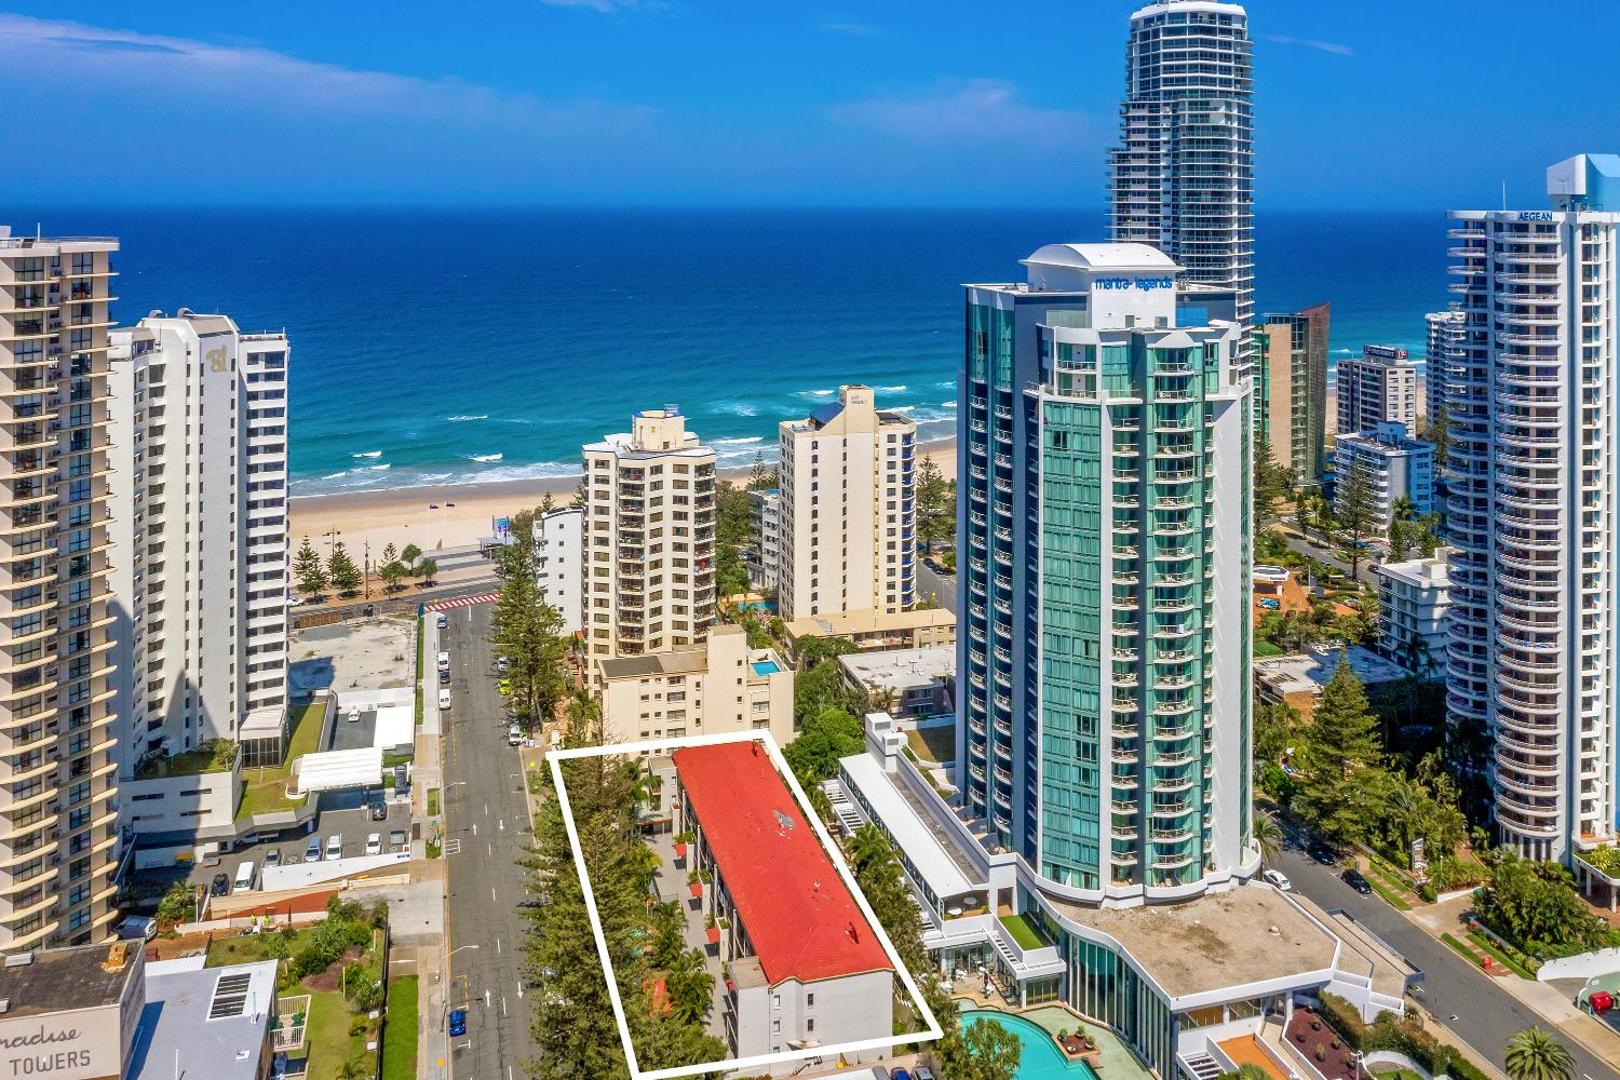 Trickett Gardens, Surfers Paradise- meters from the beach!